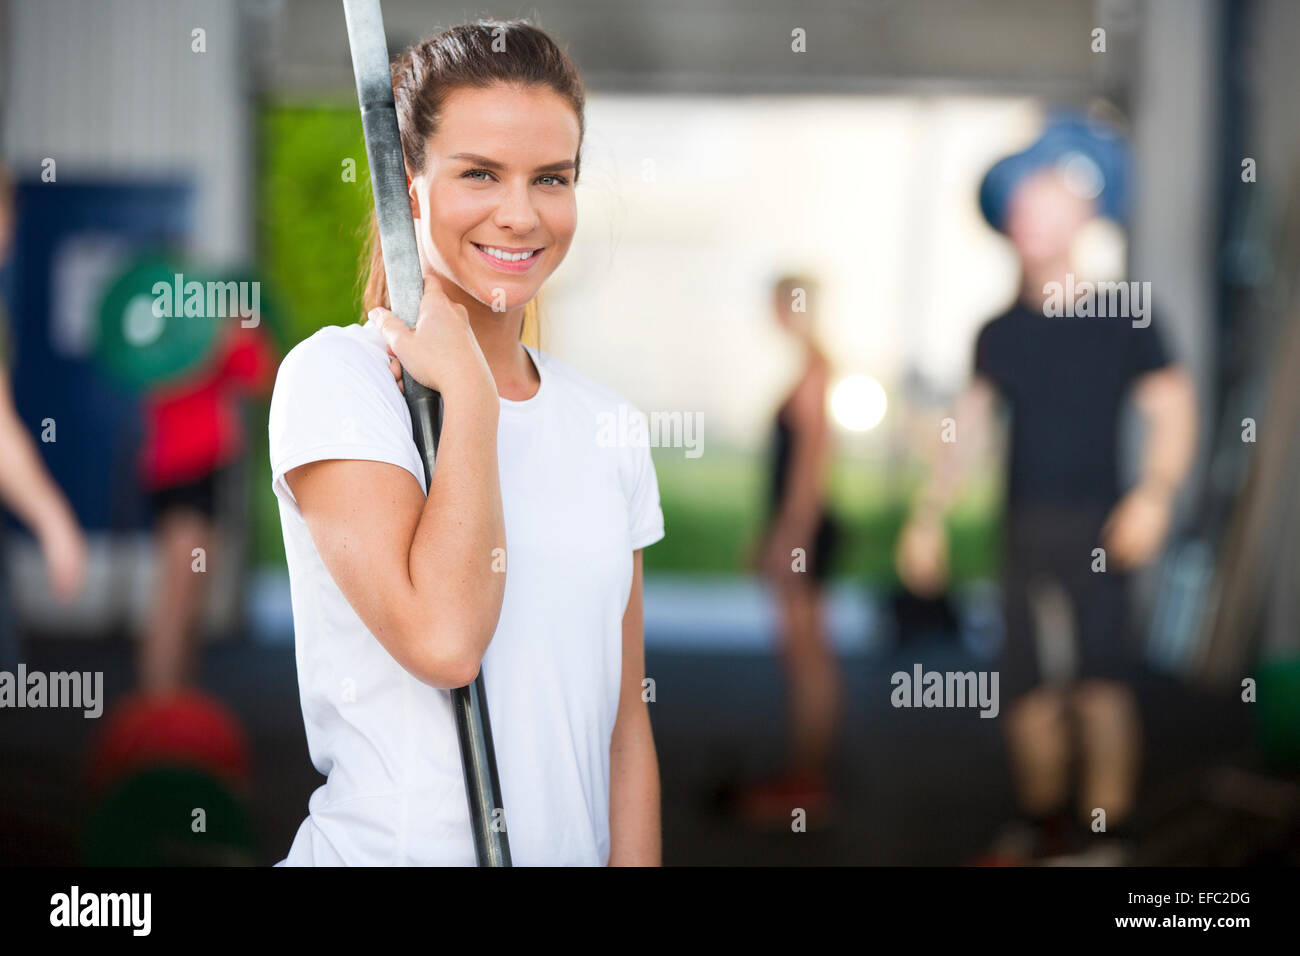 Smiling woman at fitness center Banque D'Images